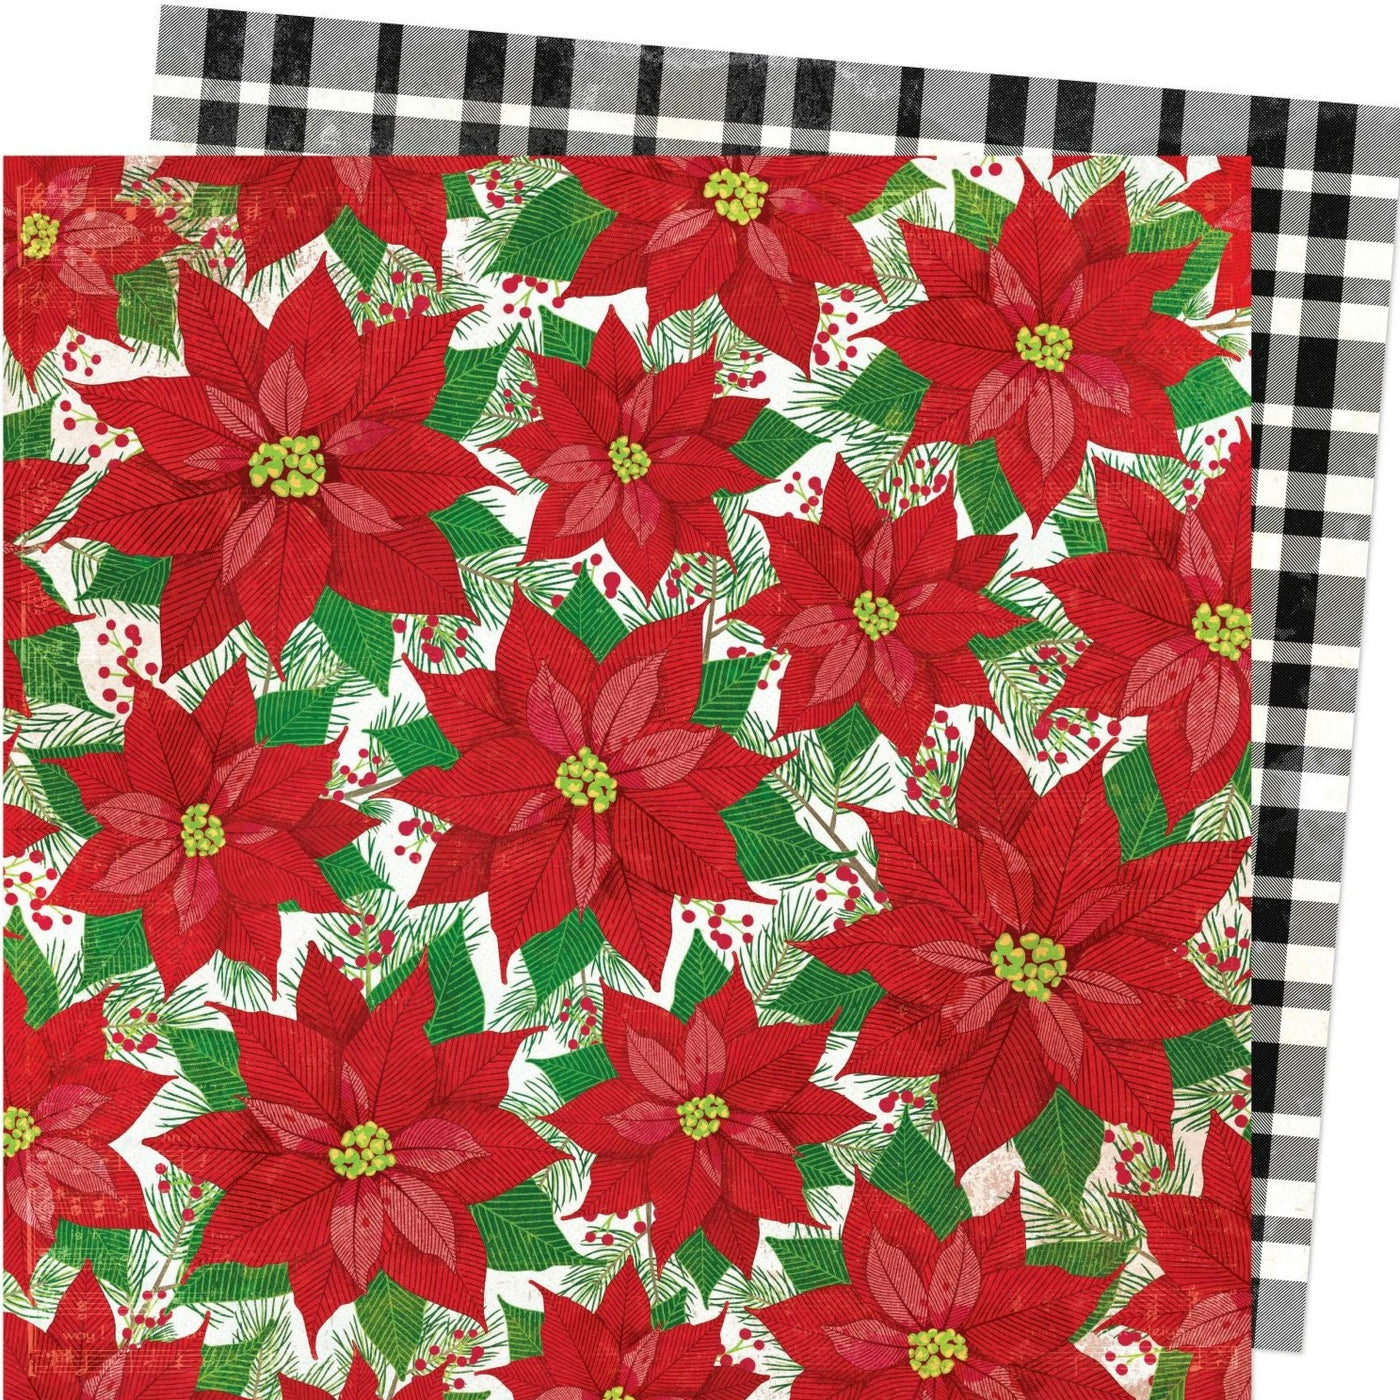 (Side A - Christmas poinsettias with pine boughs & berries on a distressed white background, Side B - large black & white plaid)